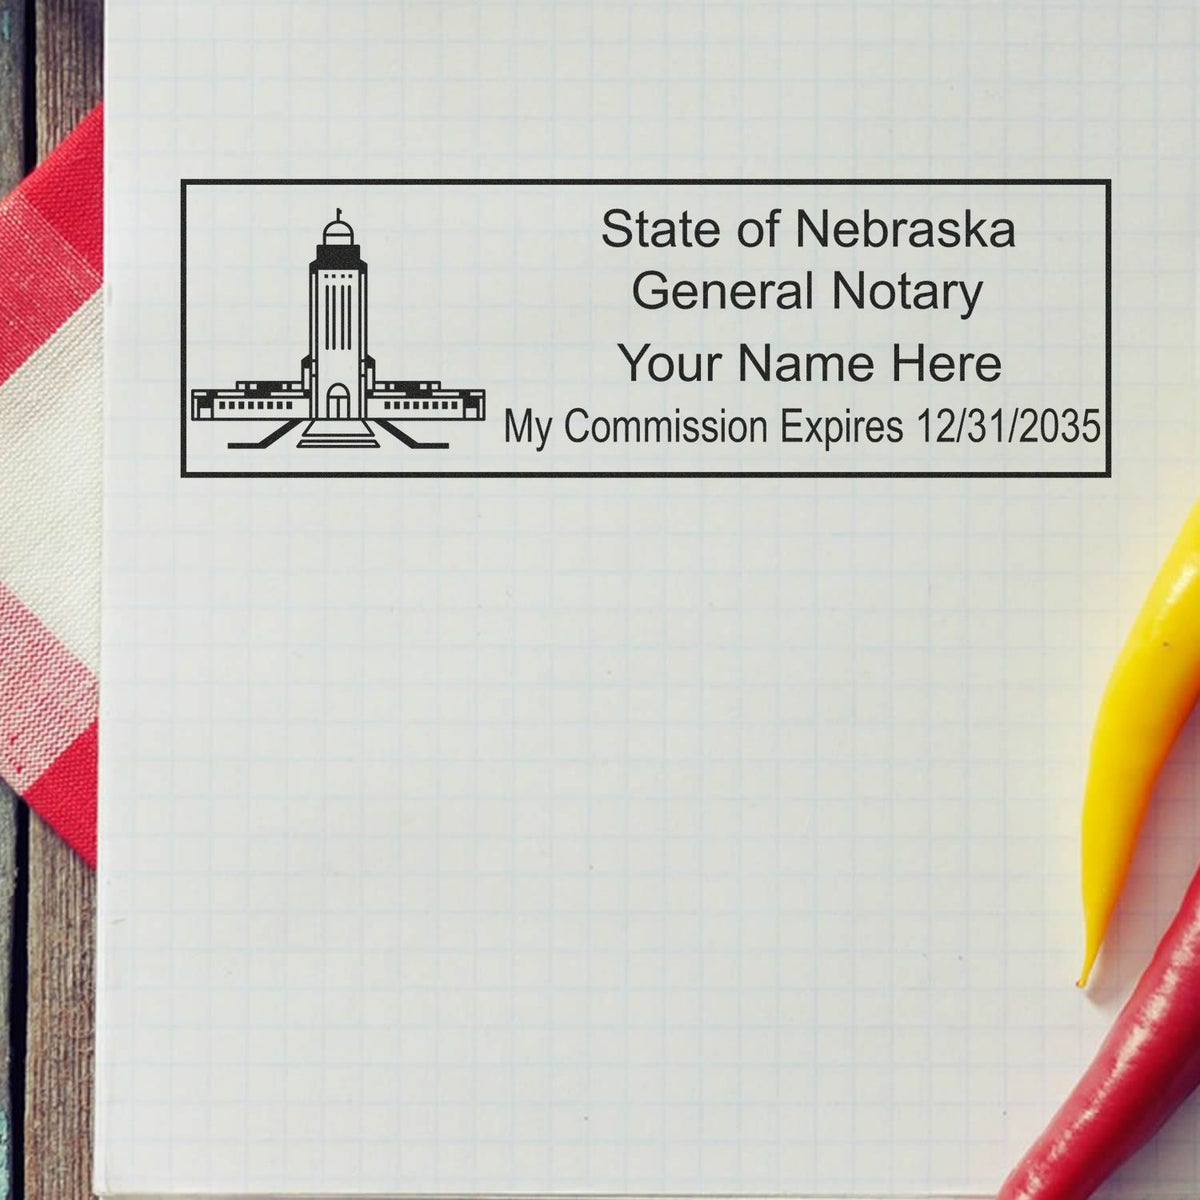 A photograph of the MaxLight Premium Pre-Inked Nebraska State Seal Notarial Stamp stamp impression reveals a vivid, professional image of the on paper.